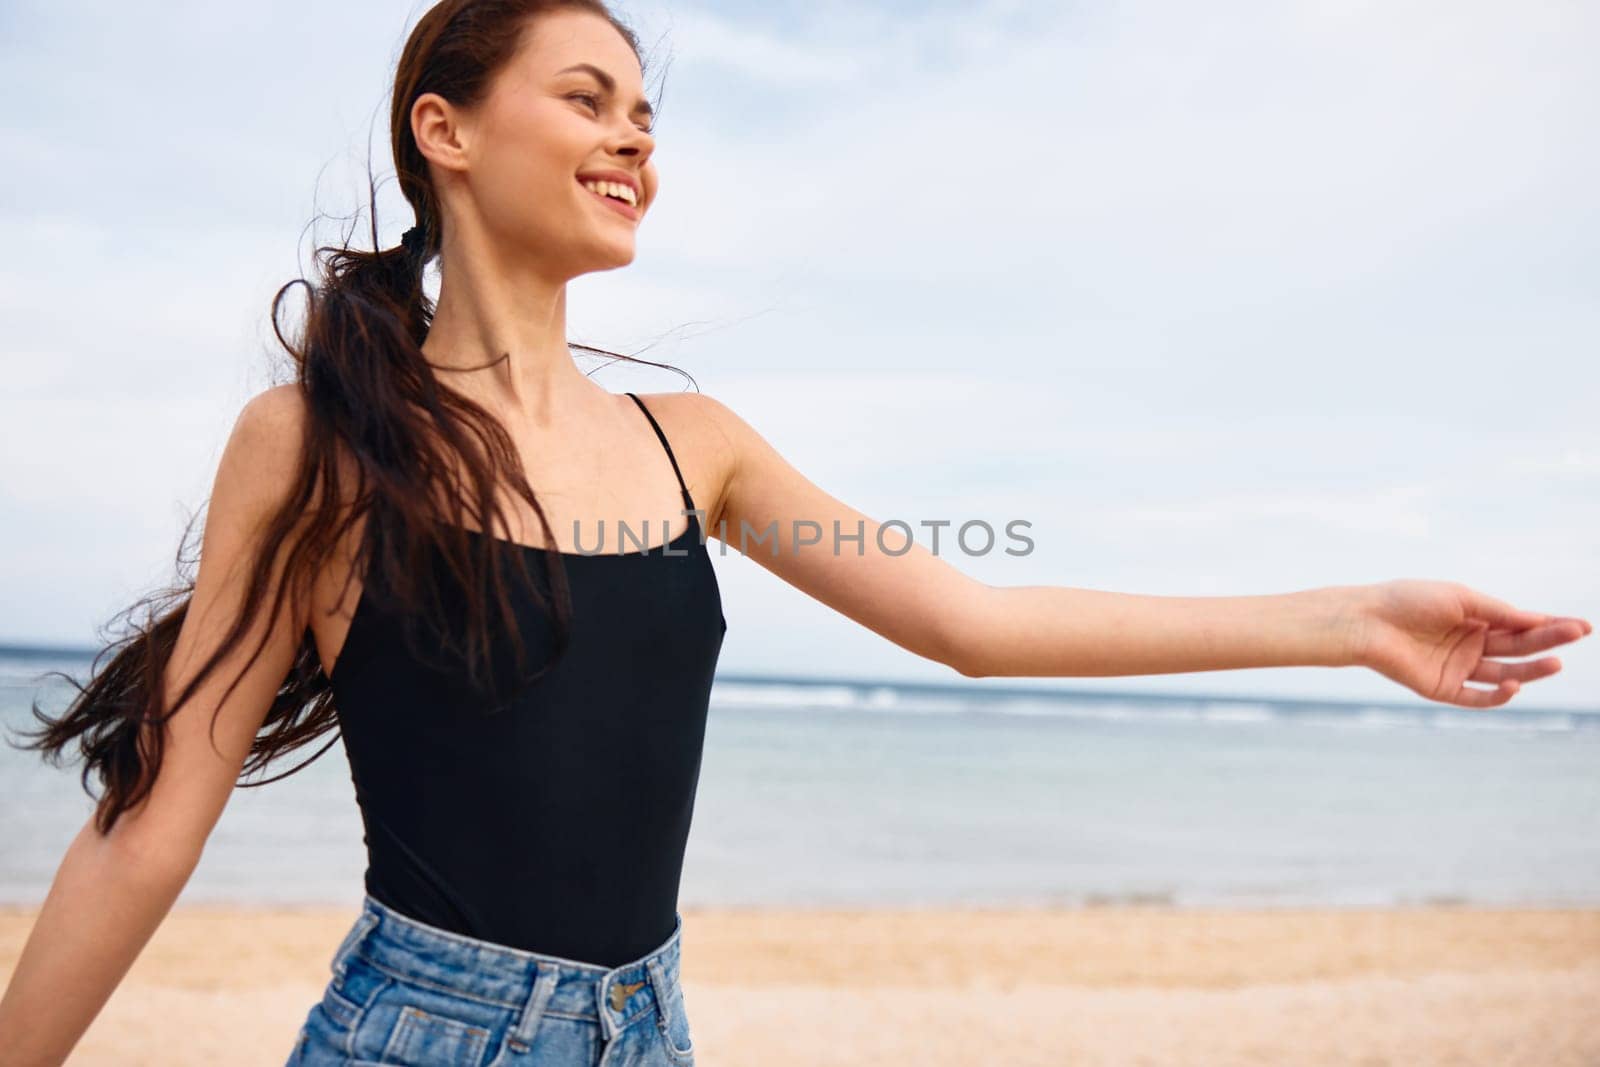 woman walking travel beach lifestyle running summer sunset young smile sea by SHOTPRIME